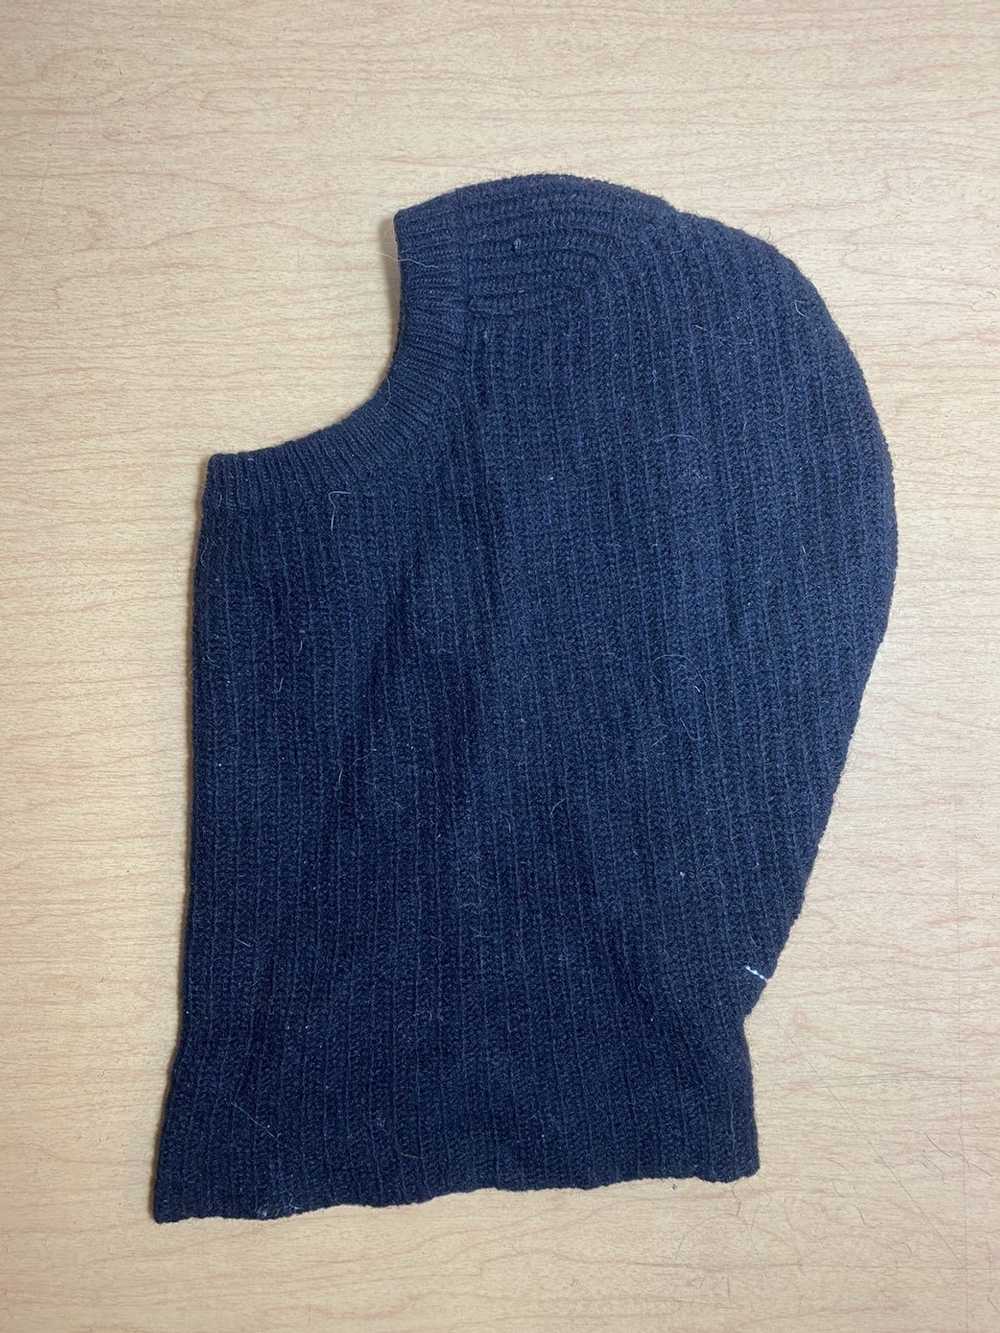 First Aid To The Injured WOOL KNIT BALACLAVA - image 1